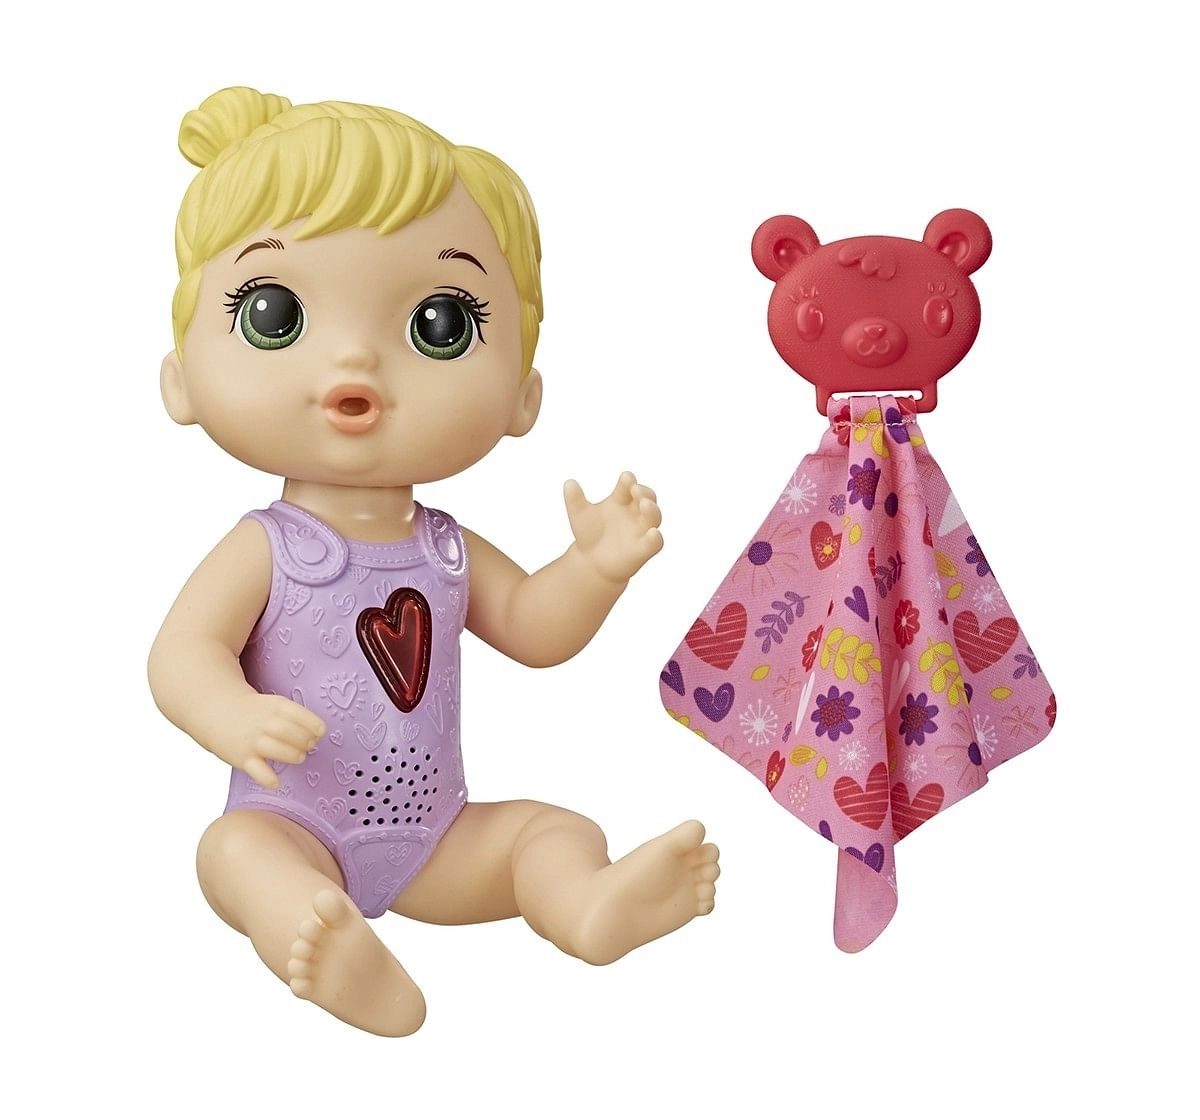 Baby Alive Happy Heartbeats Baby Doll, Responds to Play 10+ Sounds, Blinking Heart, Dolls & Accessories for Kids Ages 3 Years Old and Up 